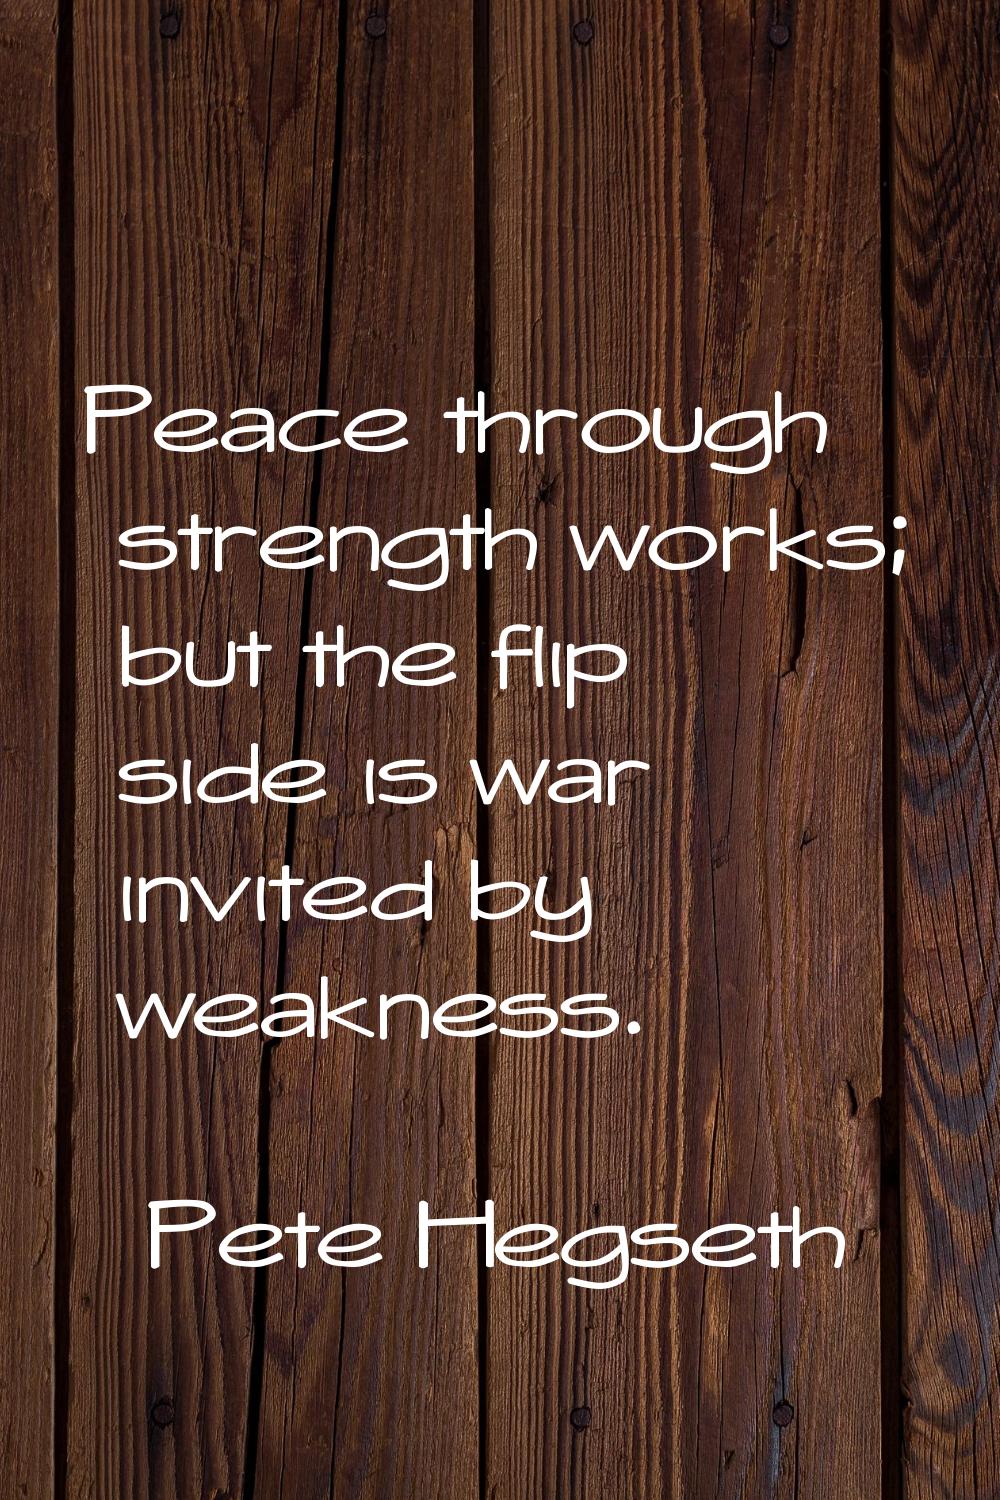 Peace through strength works; but the flip side is war invited by weakness.